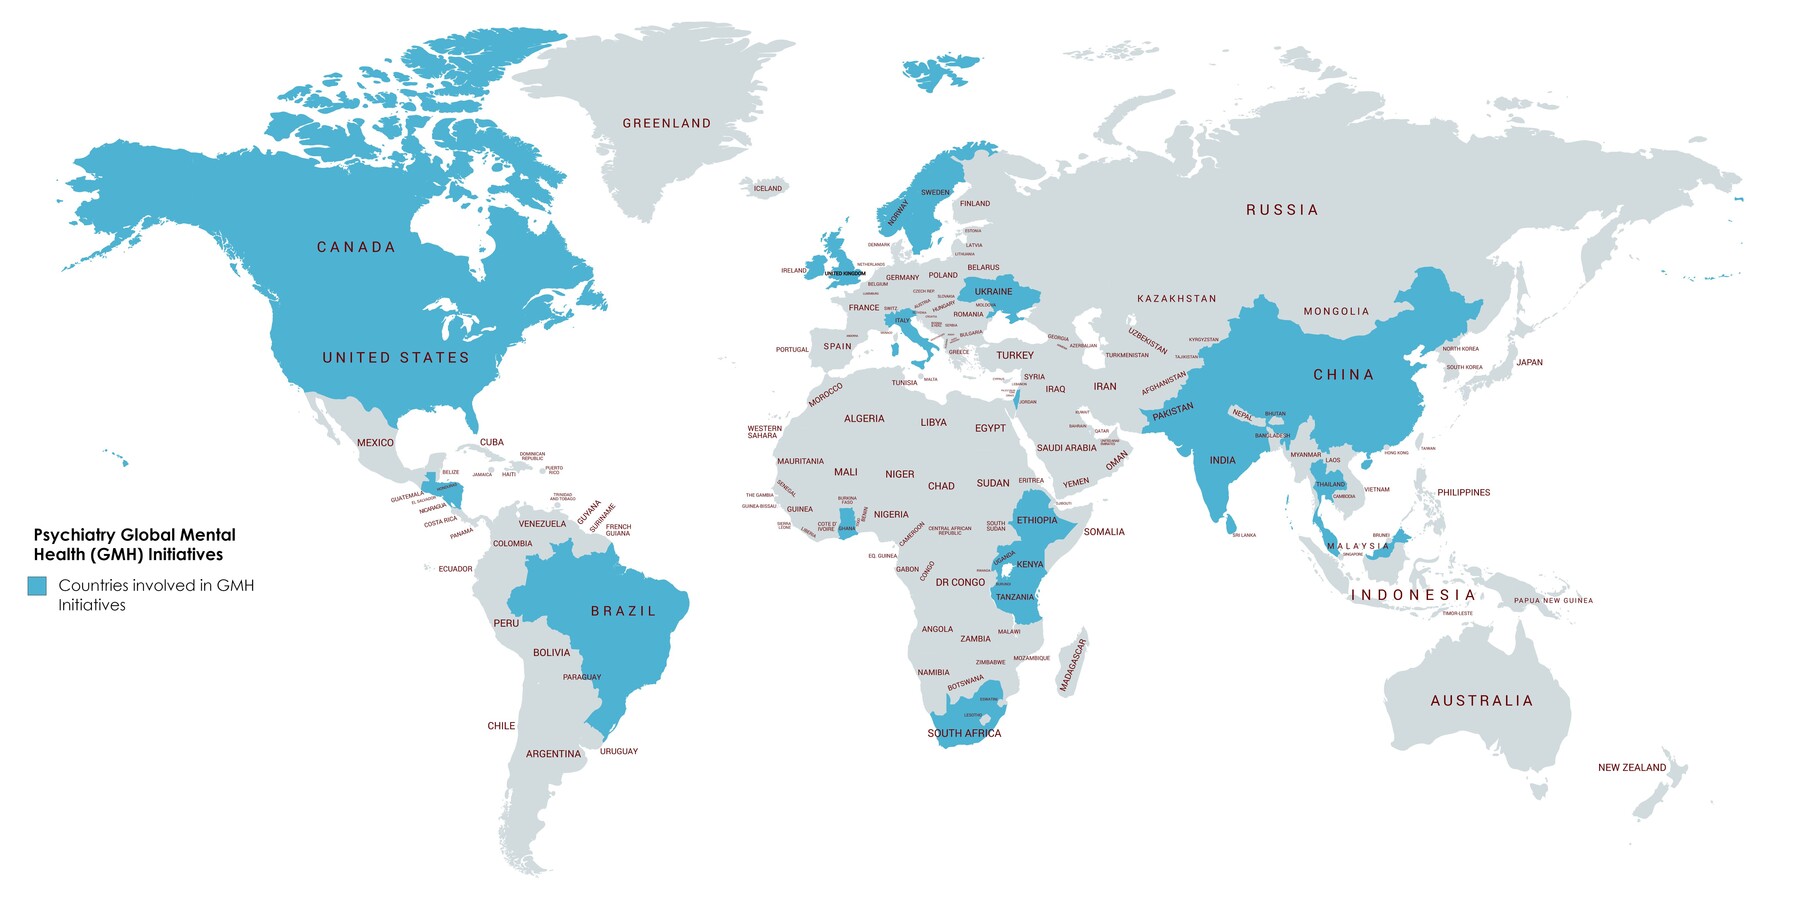 Psychiatry Global Mental Health (GMH) Initiatives by Country